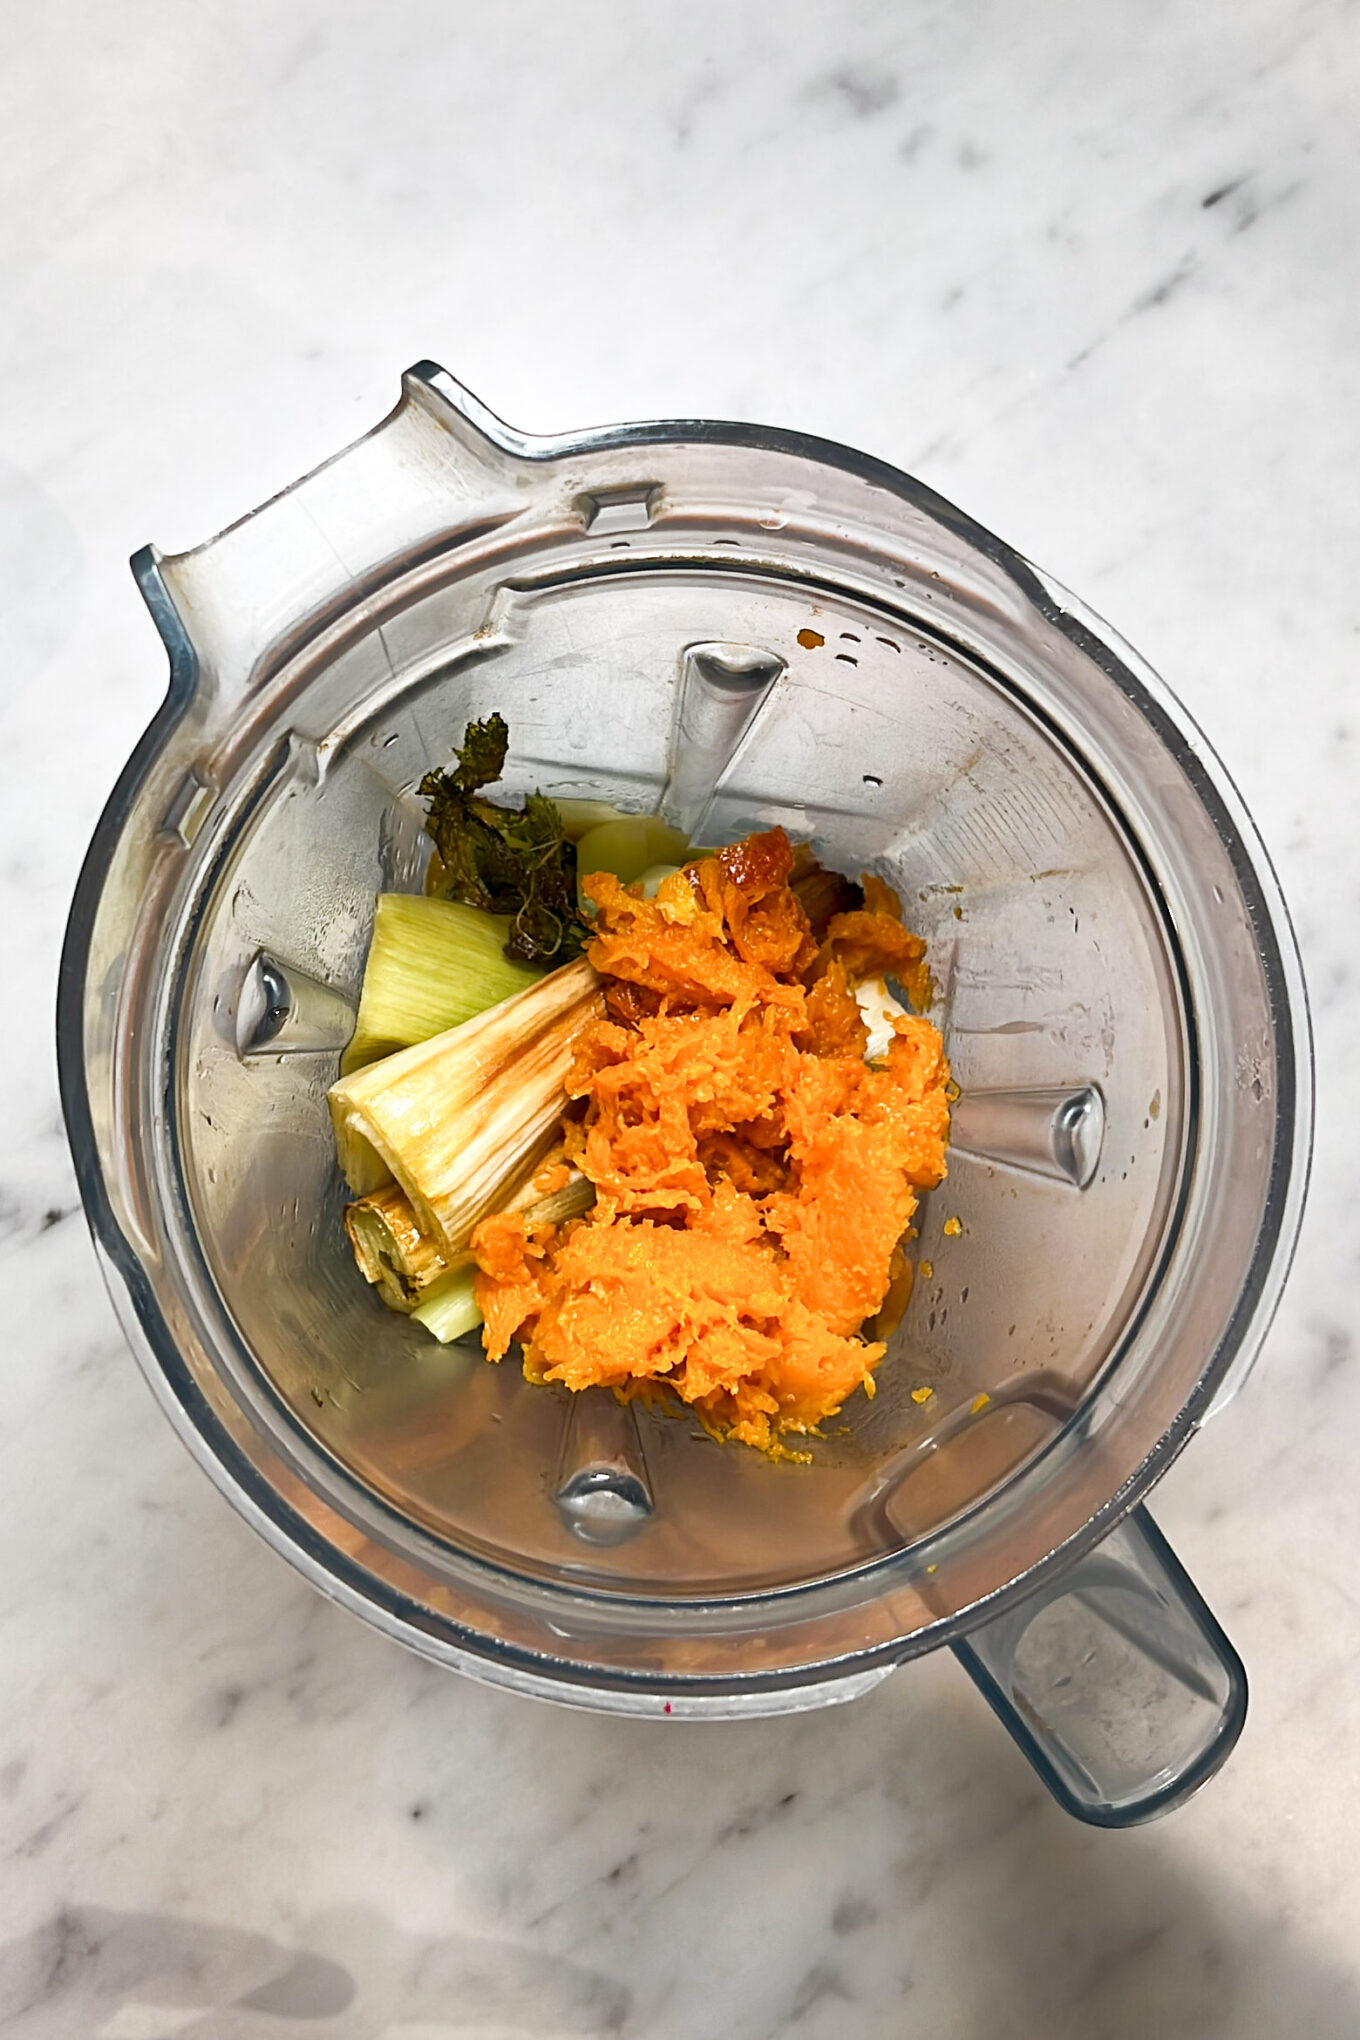 An easy and healthy blender filled with carrots, celery, and butternut squash soup recipe.